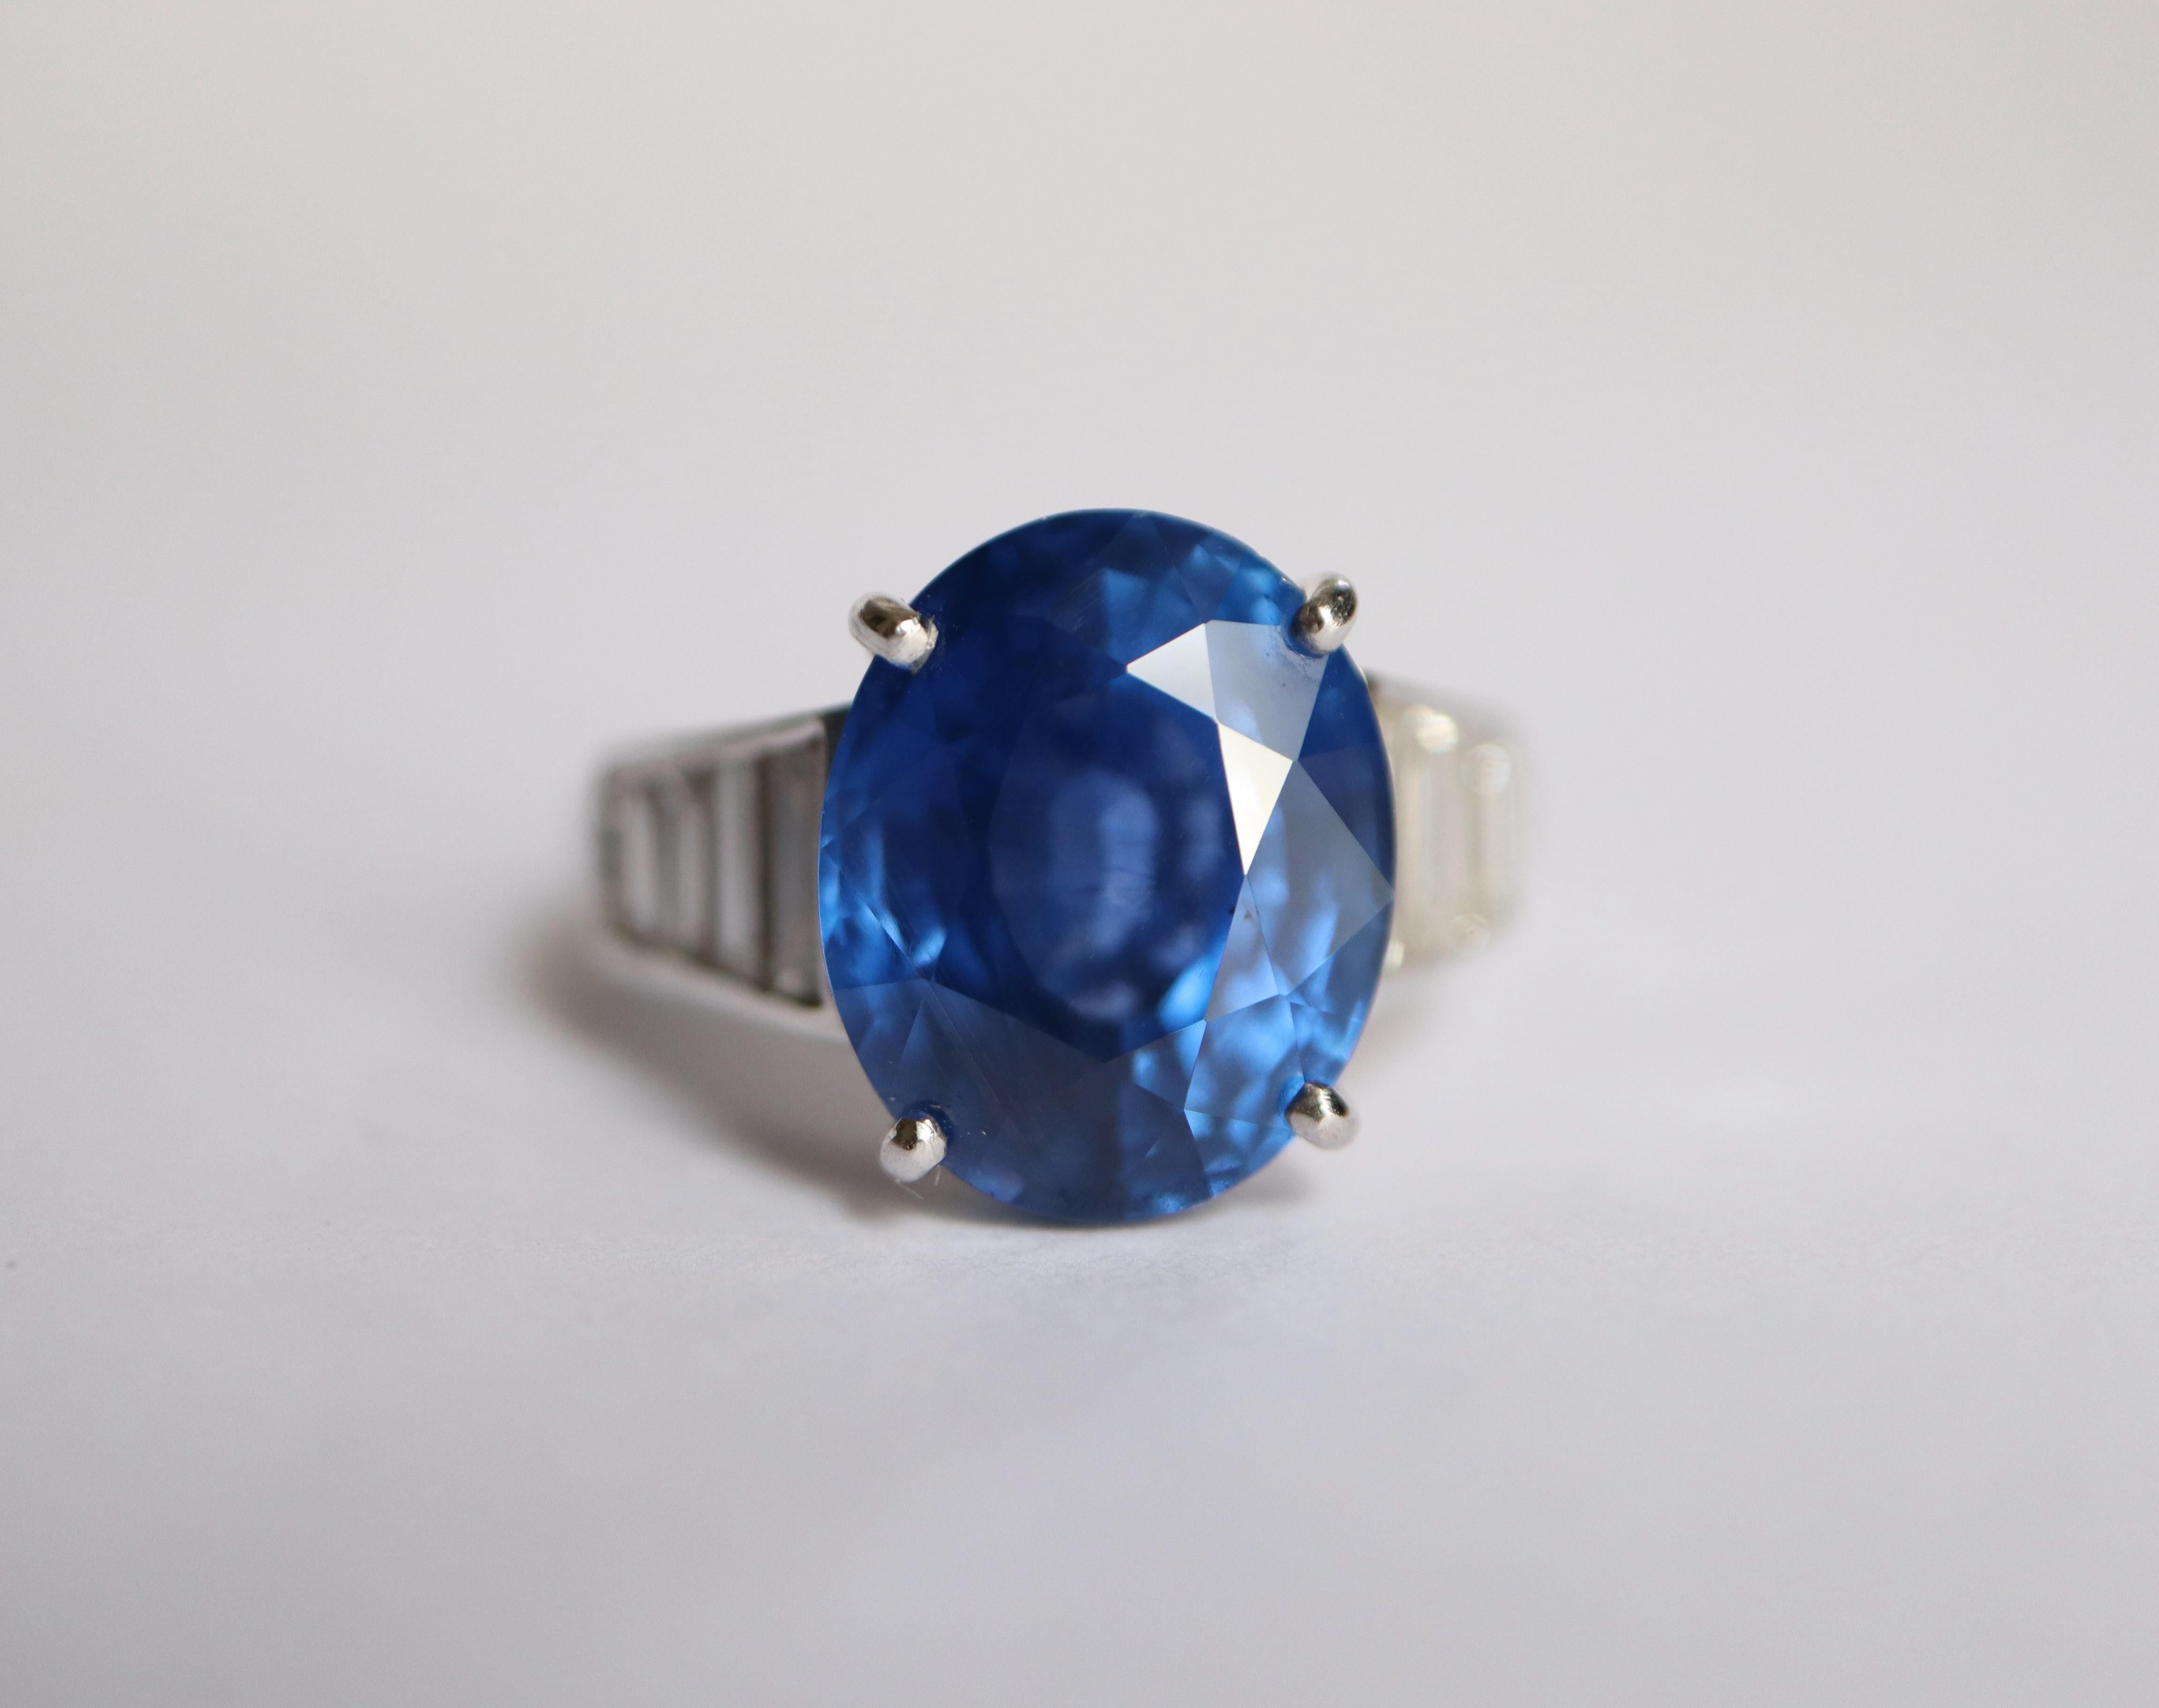 Exceptional ring in 18 kt white gold and platinum comprising in its center an unheated Burmese sapphire weighing 10.83 carats supported on both sides by 4 baguette diamonds. Or 8 baguette diamonds
Twice 0.5 to 0.6 carat. Total weight of diamonds: 1